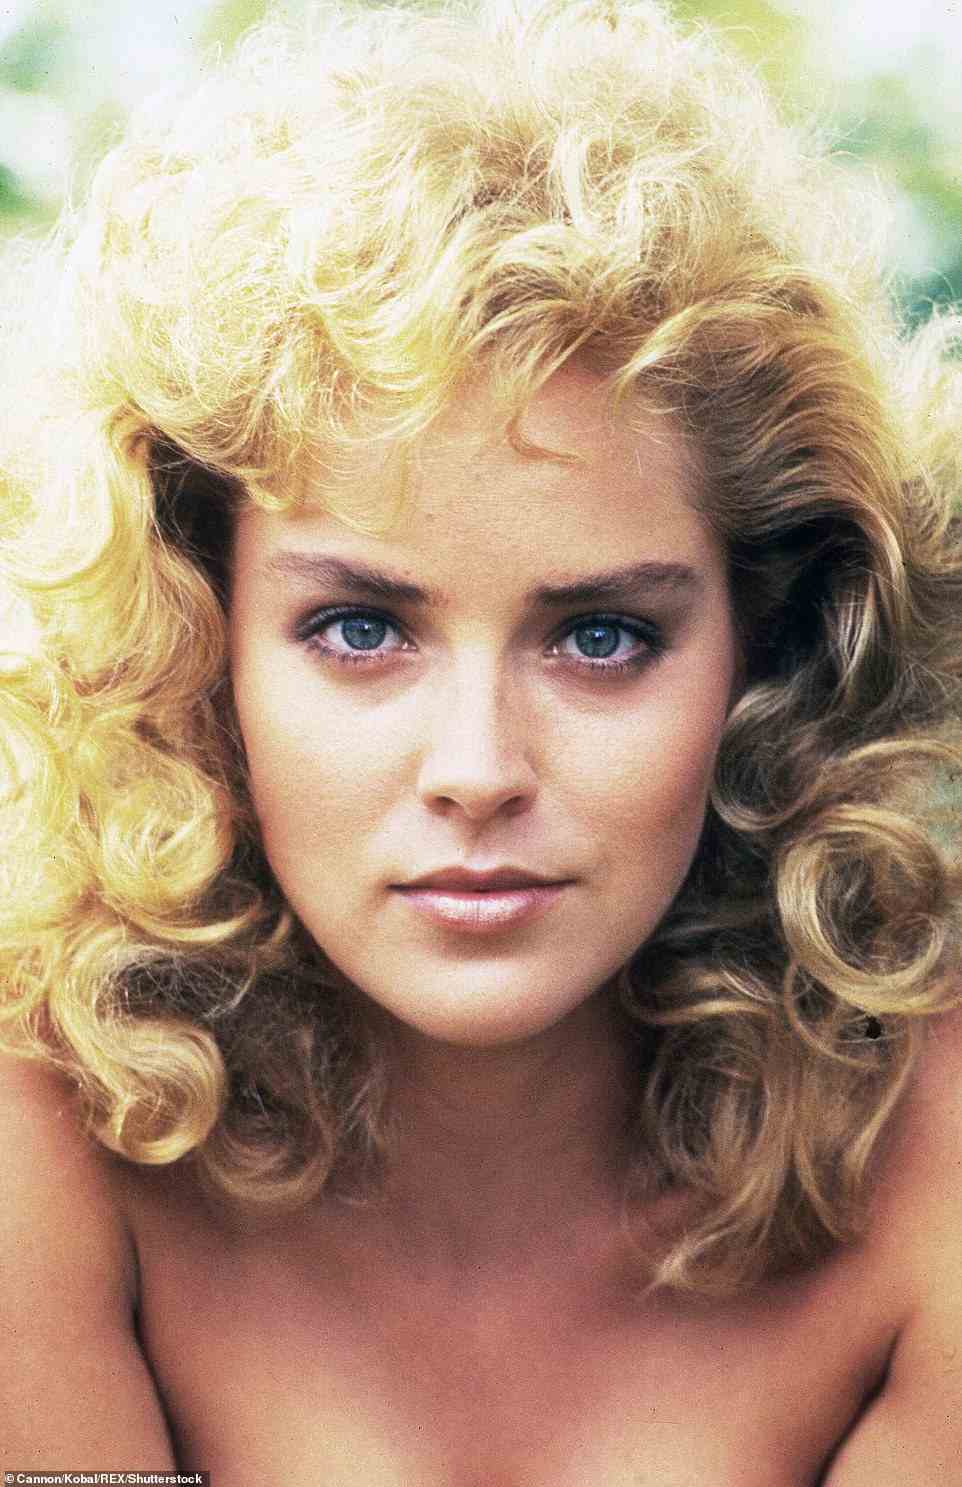 Telling all: Sharon Stone has been open about her fertility struggles in recent years, with the star sharing details about her abortion as a teen and her inability to conceive afterwards (pictured in 1985)